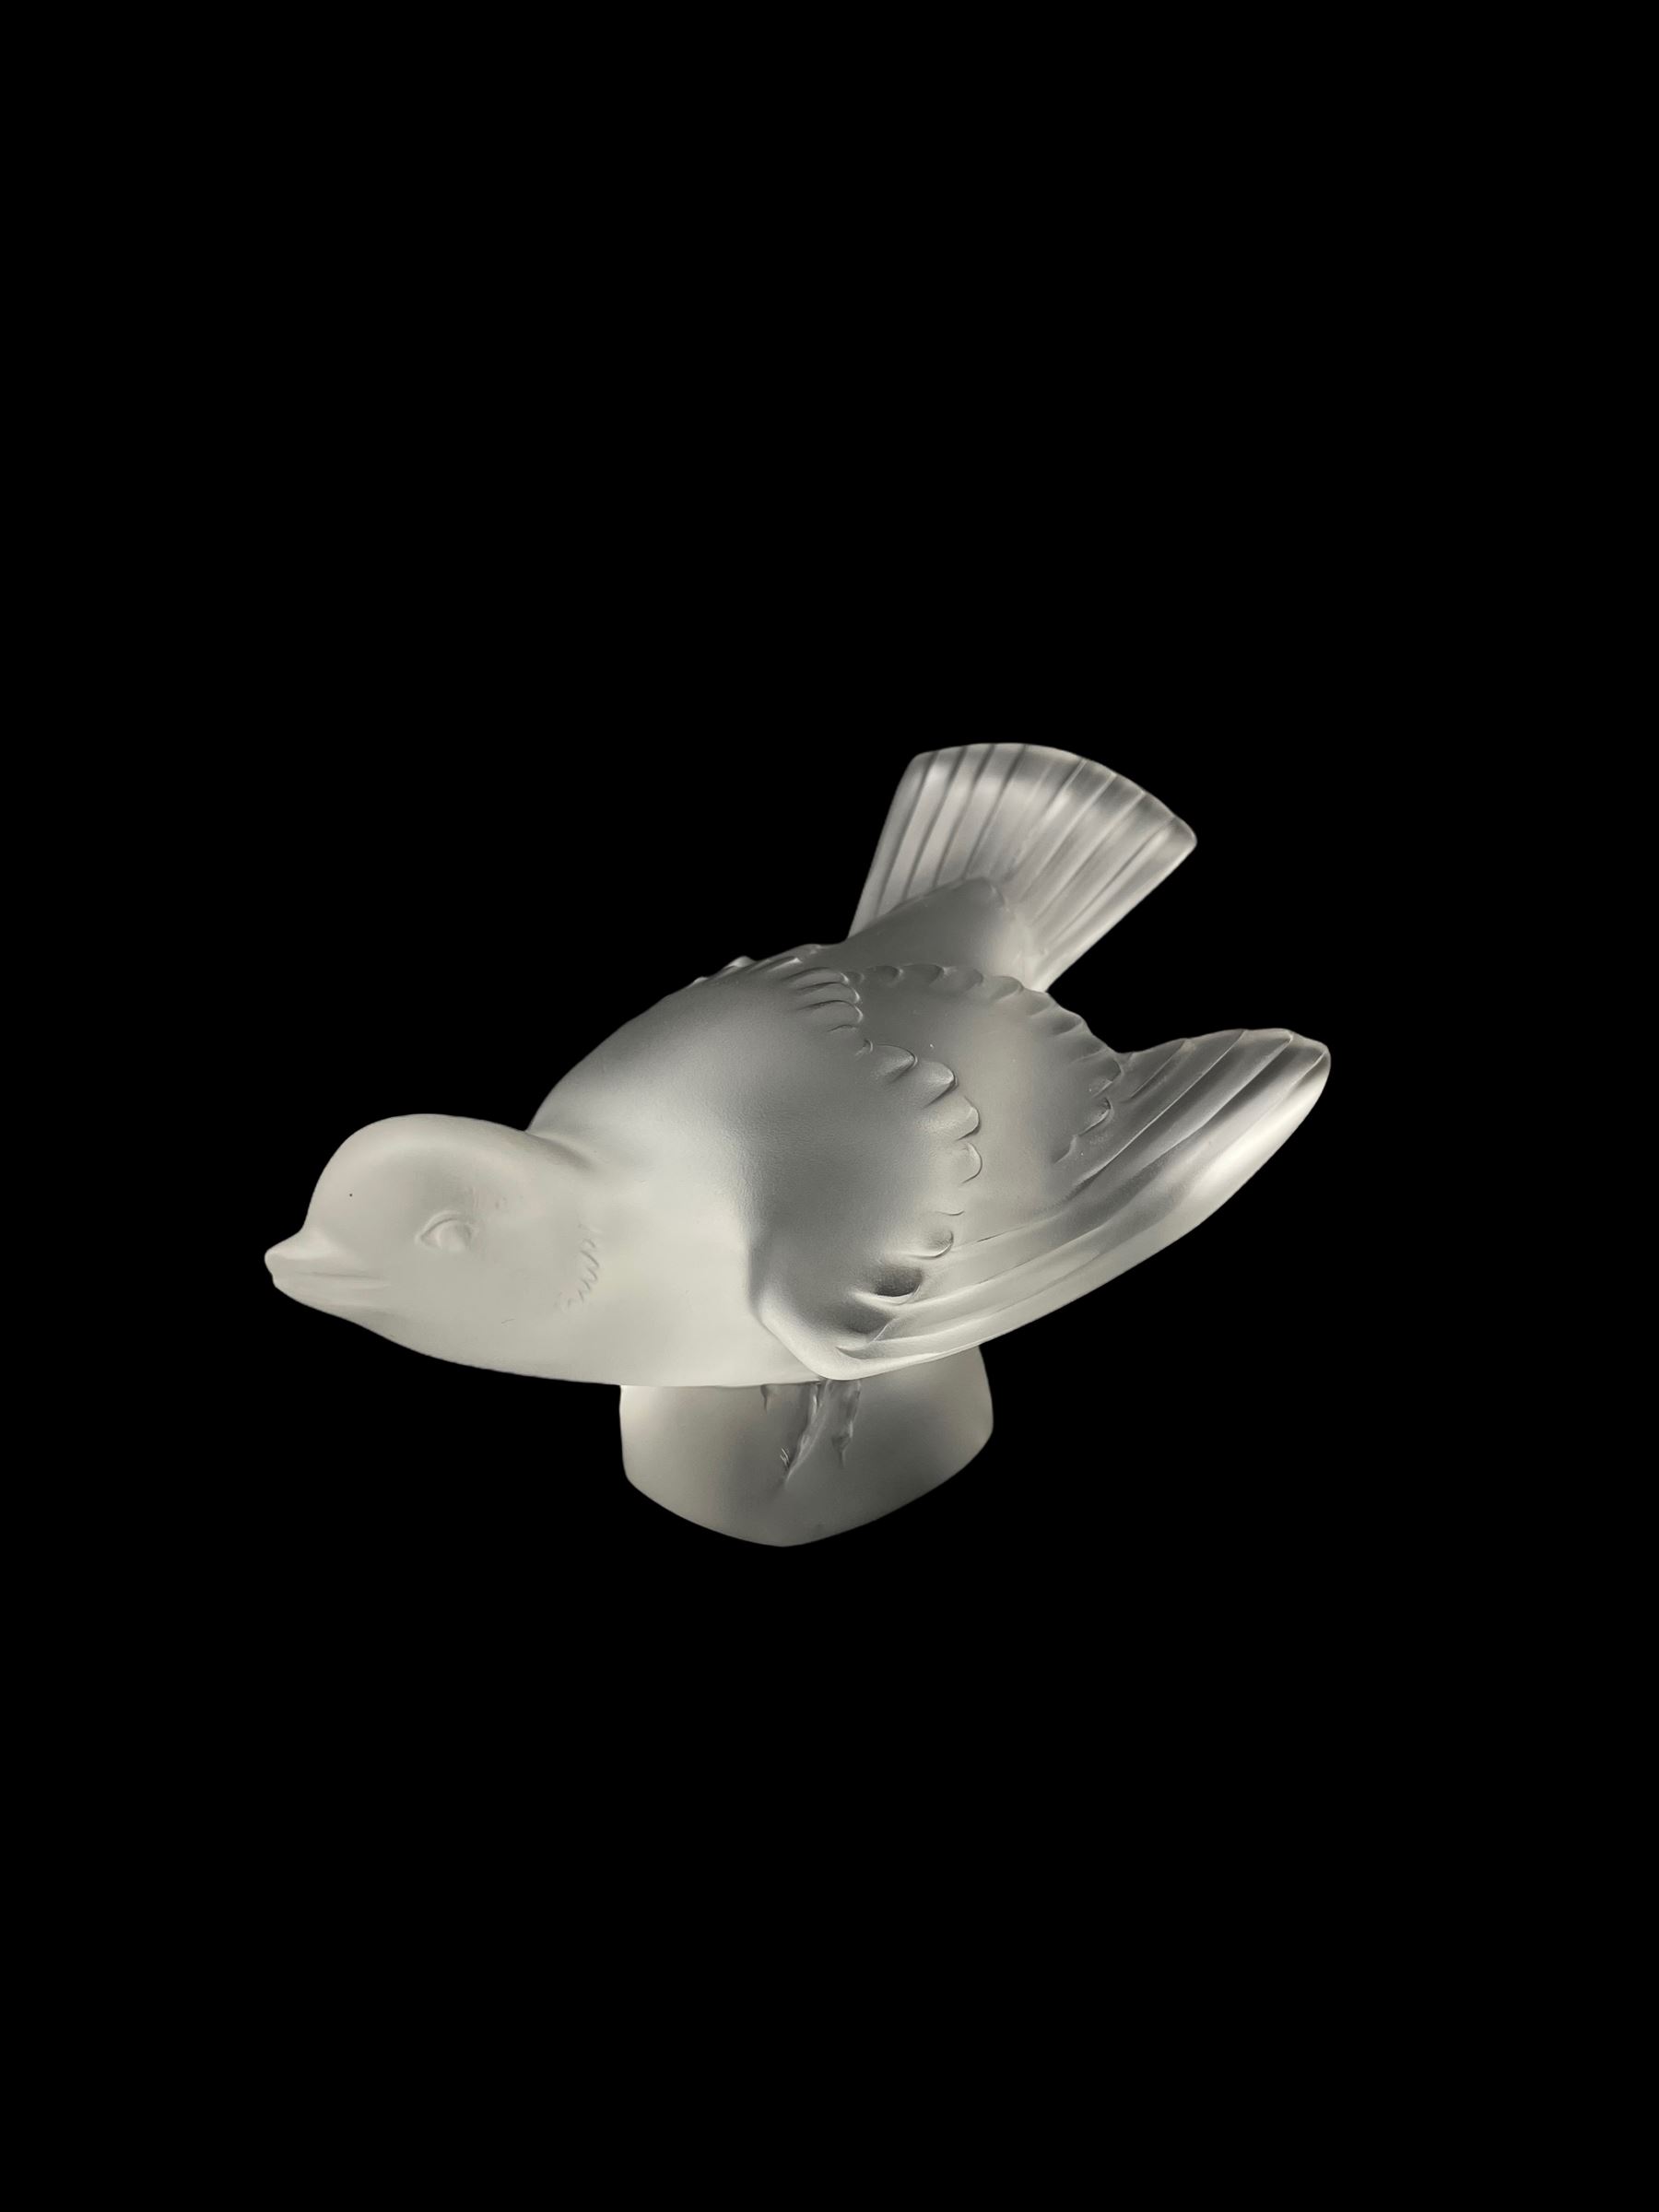 Lalique frosted glass model of a Sparrow with wings splayed